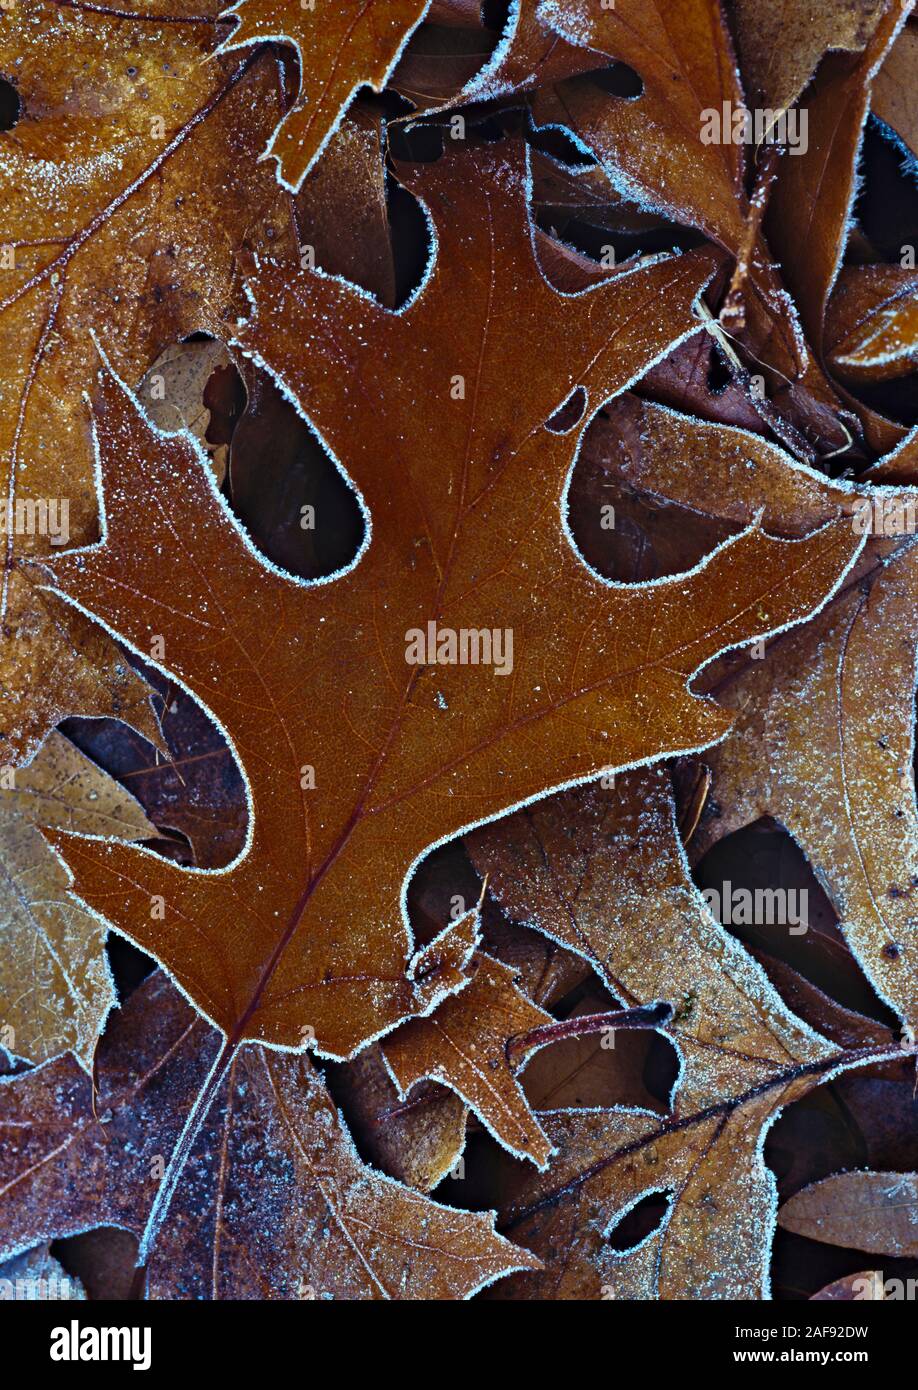 The cold autumn air formed frost on the woodland floor and along the perimeter of this magical scarlet oak leaf of species Quercus coccinea Stock Photo